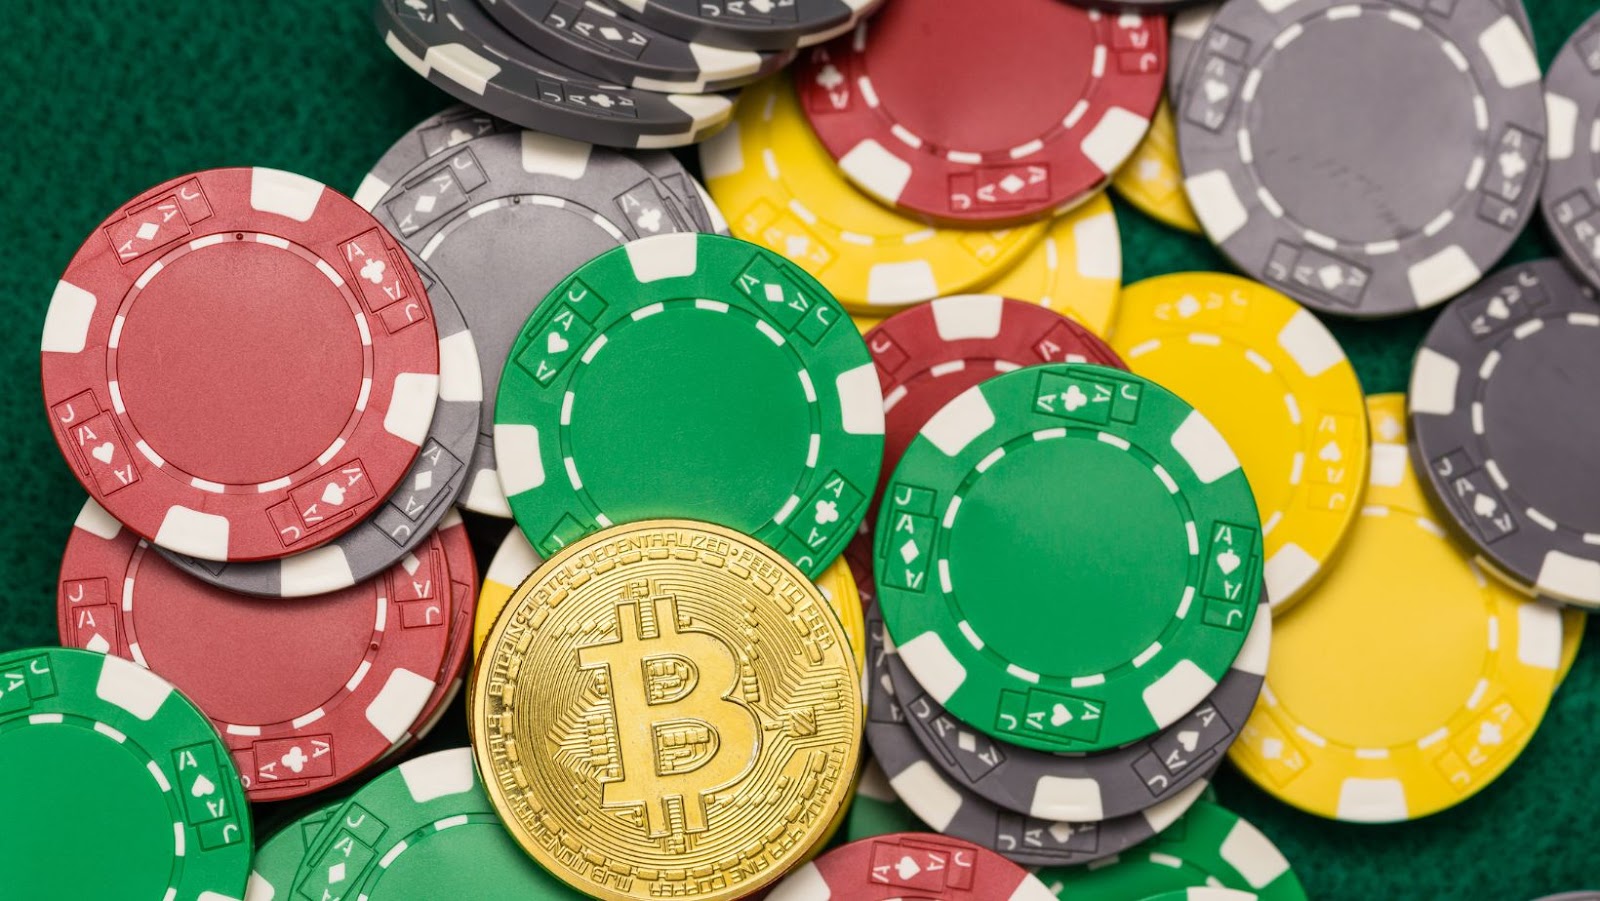 Why Should You Bet on Crypto Casino Games? Know Everything About Free Bitcoin Faucet in Bitcoin Casinos Here!